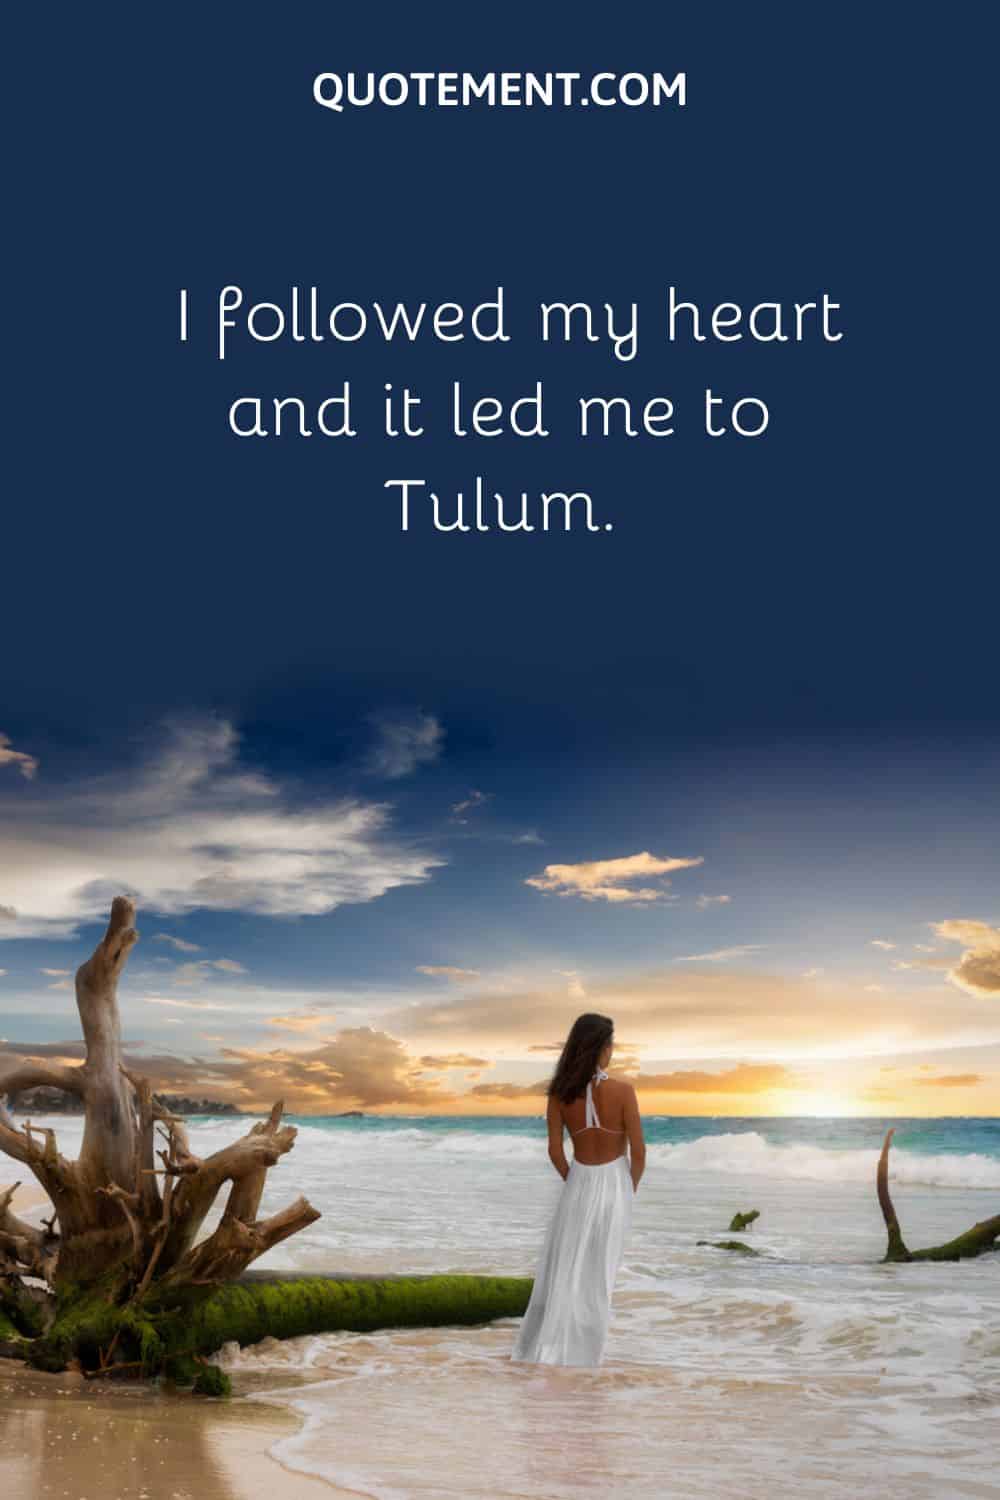 I followed my heart and it led me to Tulum